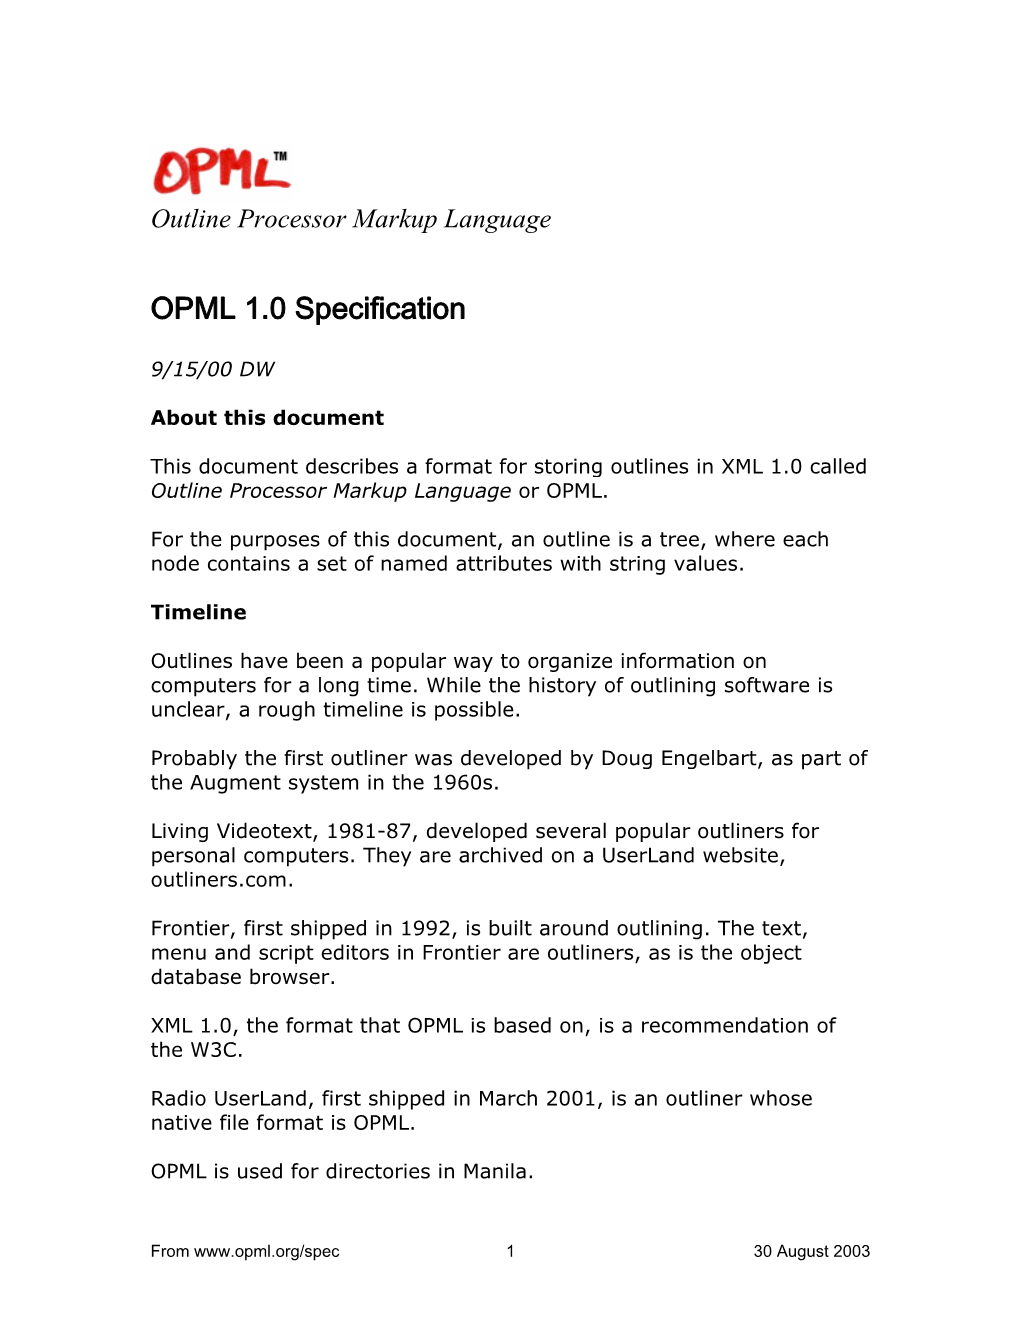 Outlin Processor Markup Language OPML 1.0 Specification